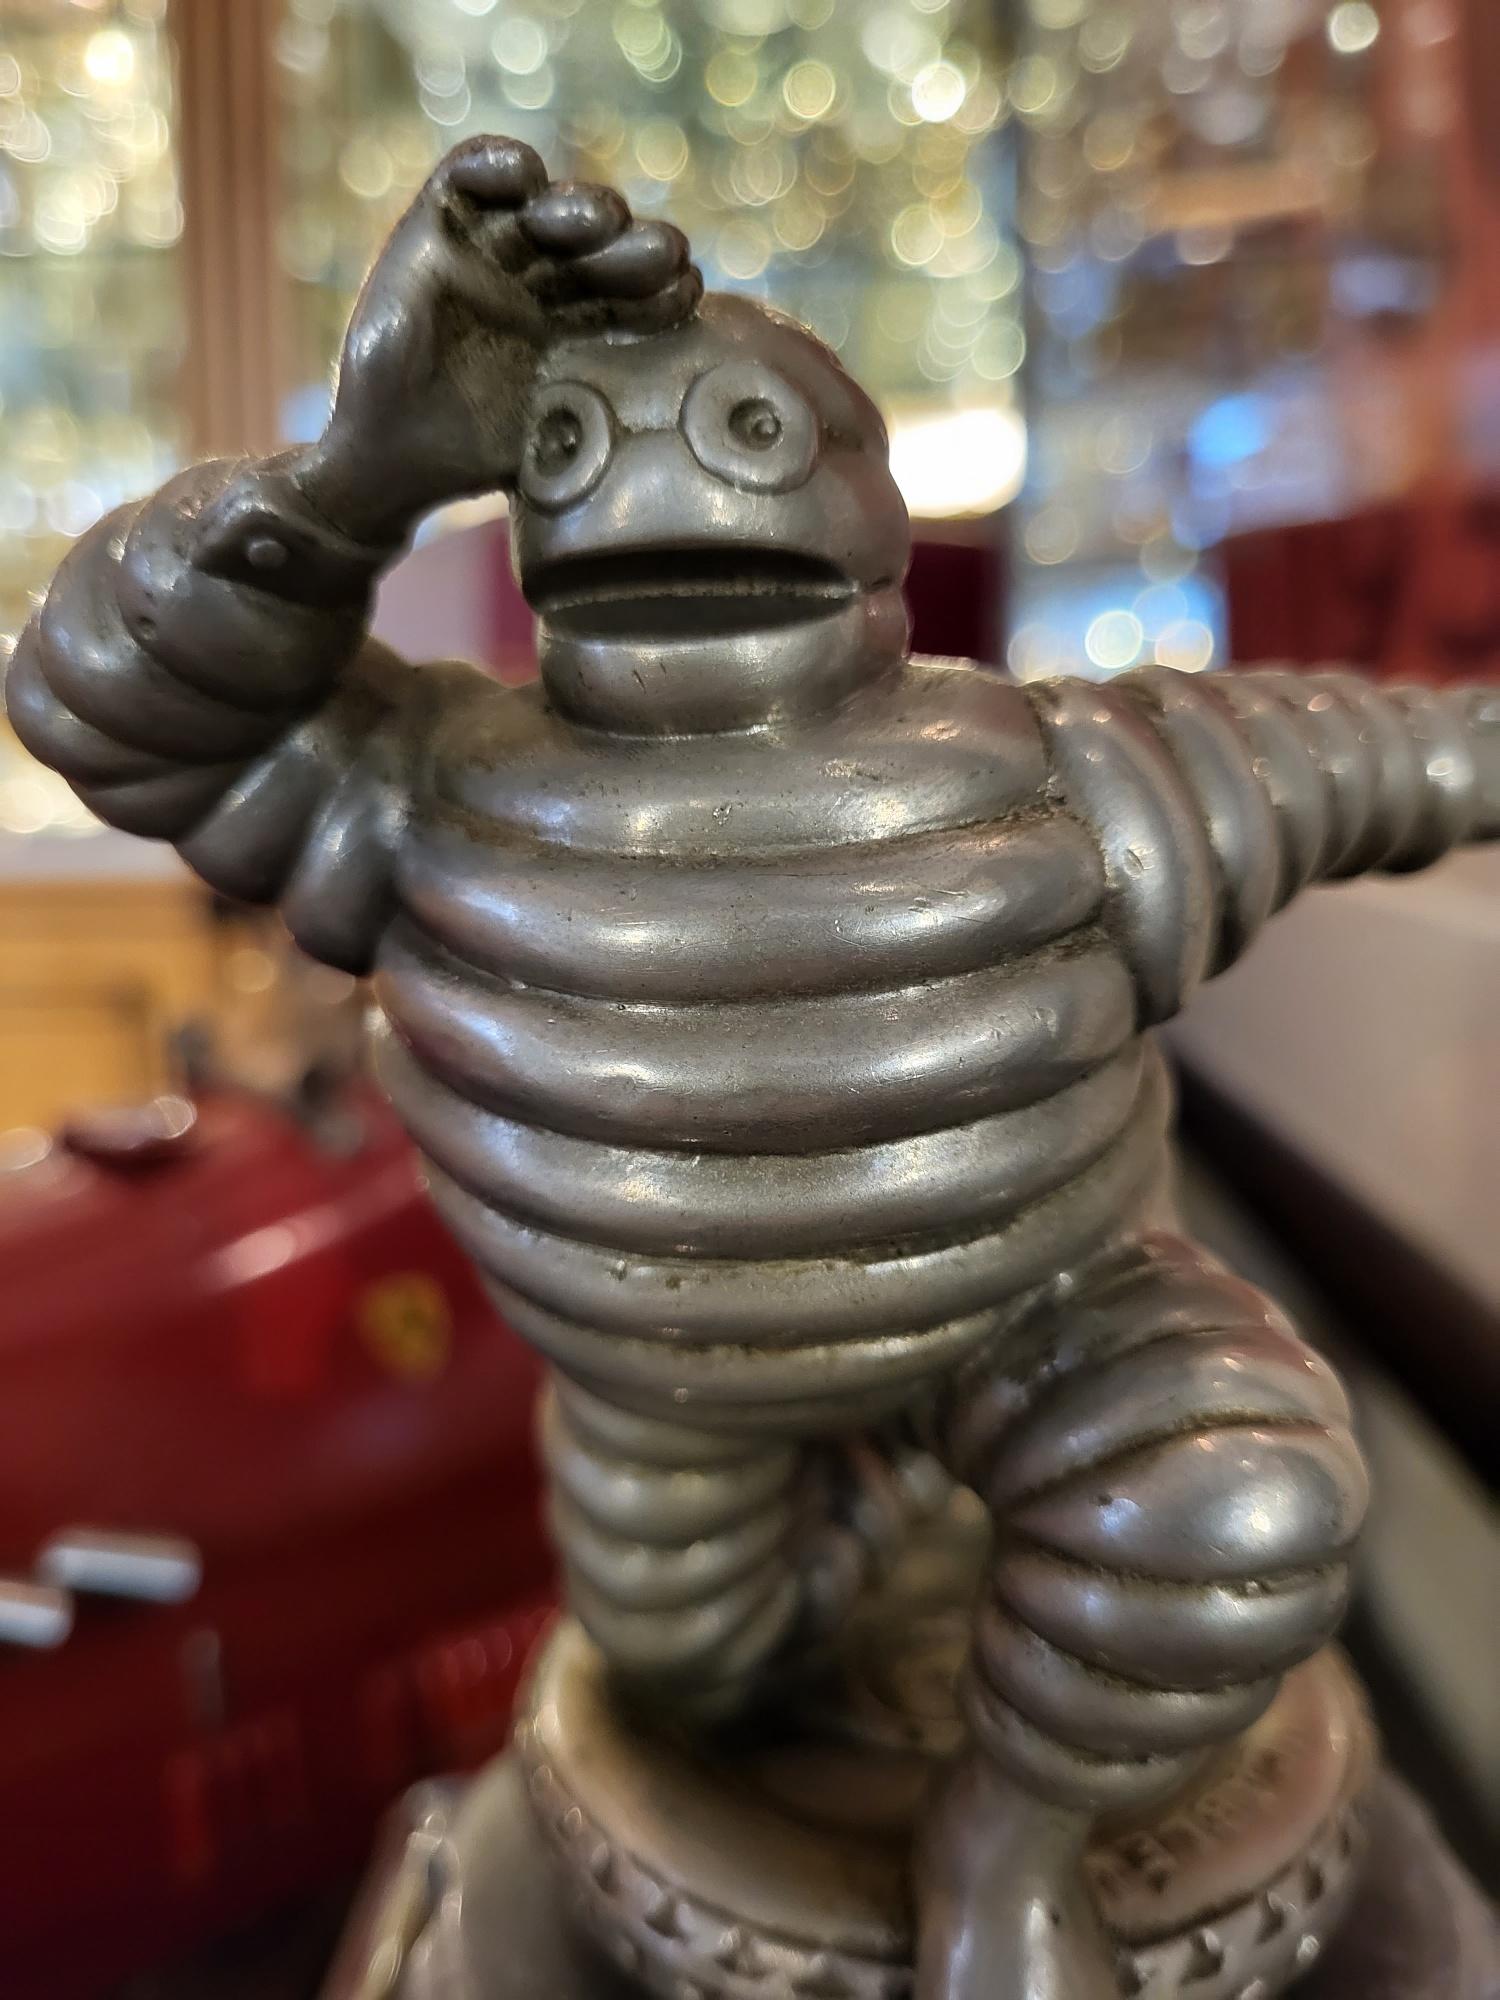 Michelin

The earliest design of the famous tyre manufacturer’s car mascot, dating from 1916, featuring Mr. Bibendum (Michelin Man) in the ‘scruter l’horizon’ stance (looking into the distance) and kneeling on a Michelin tyre. the heavy and solid